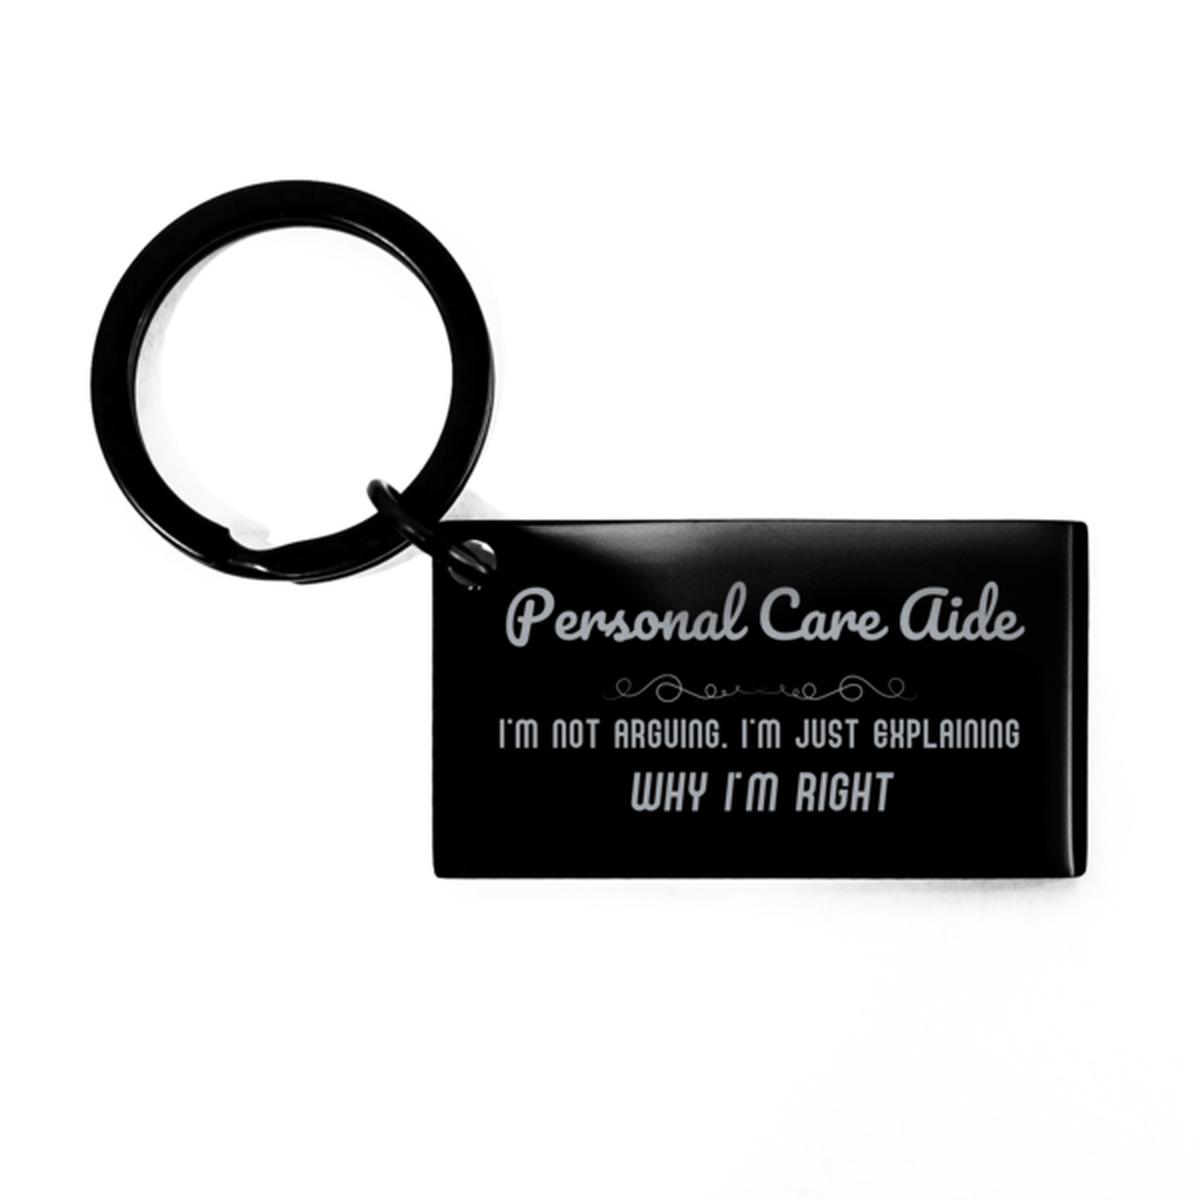 Personal Care Aide I'm not Arguing. I'm Just Explaining Why I'm RIGHT Keychain, Funny Saying Quote Personal Care Aide Gifts For Personal Care Aide Graduation Birthday Christmas Gifts for Men Women Coworker